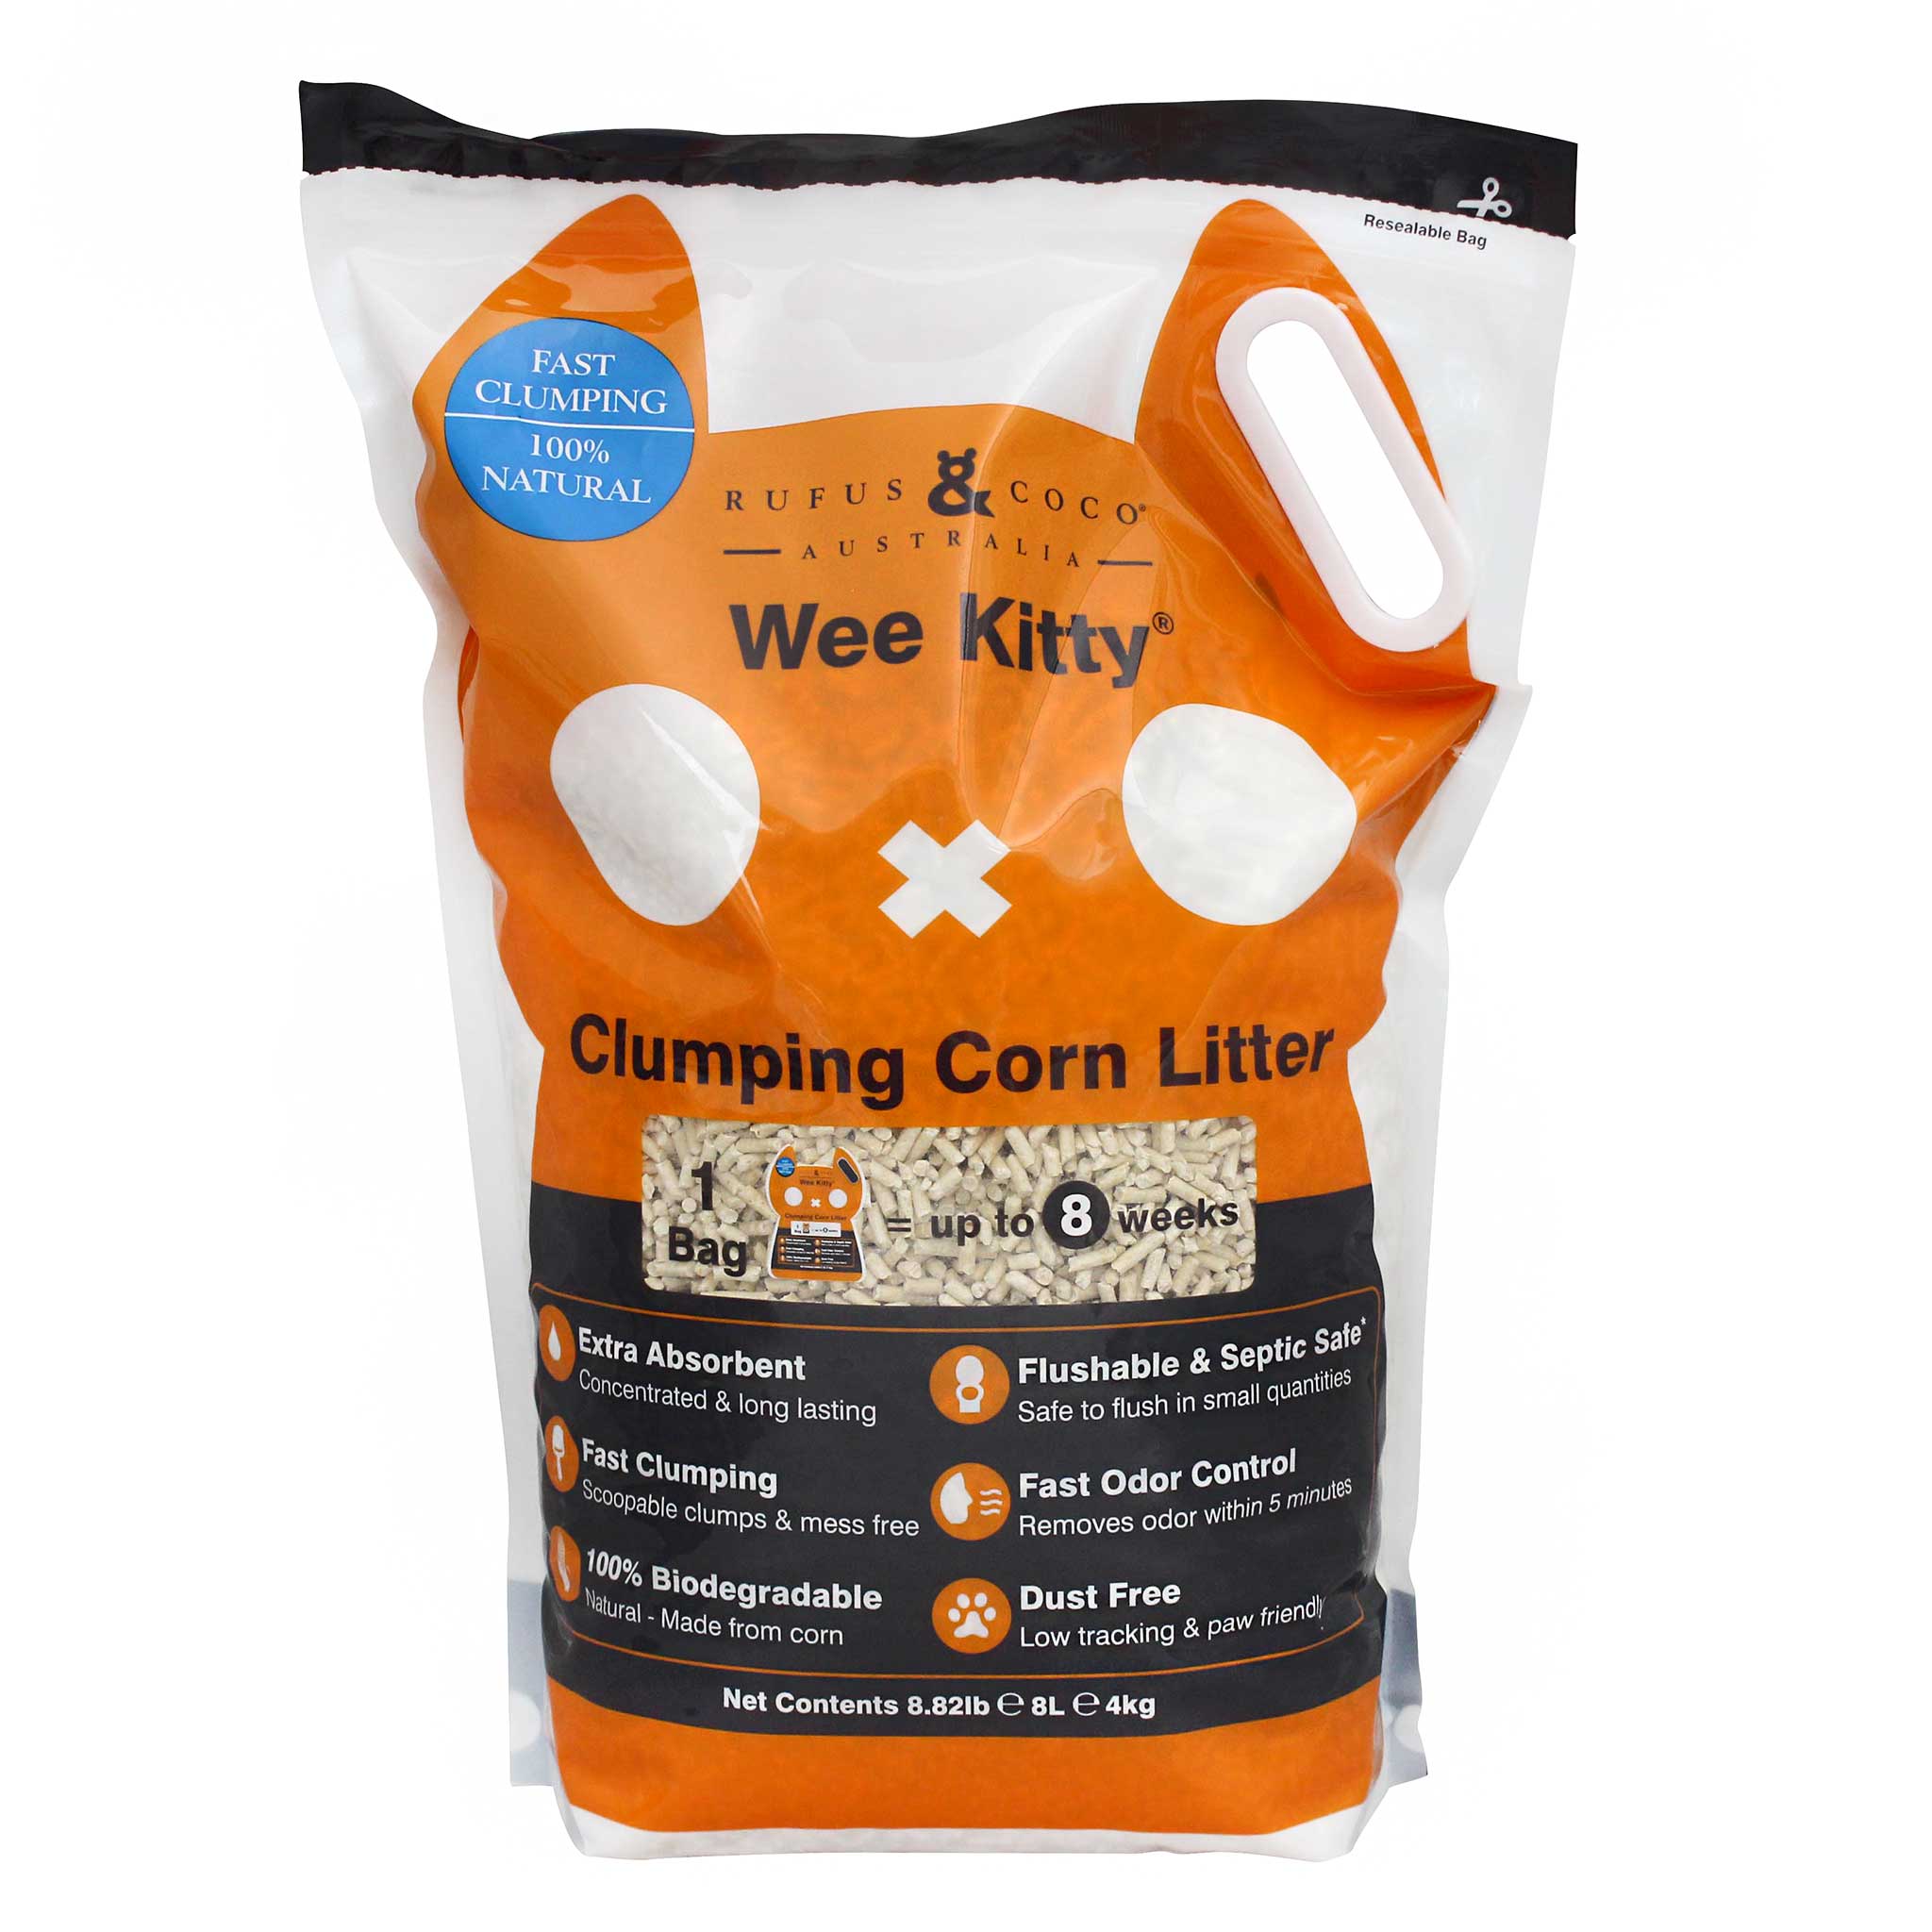 Rufus & Coco Wee Kitty Clumping Corn Litter - vet-n-pet DIRECT